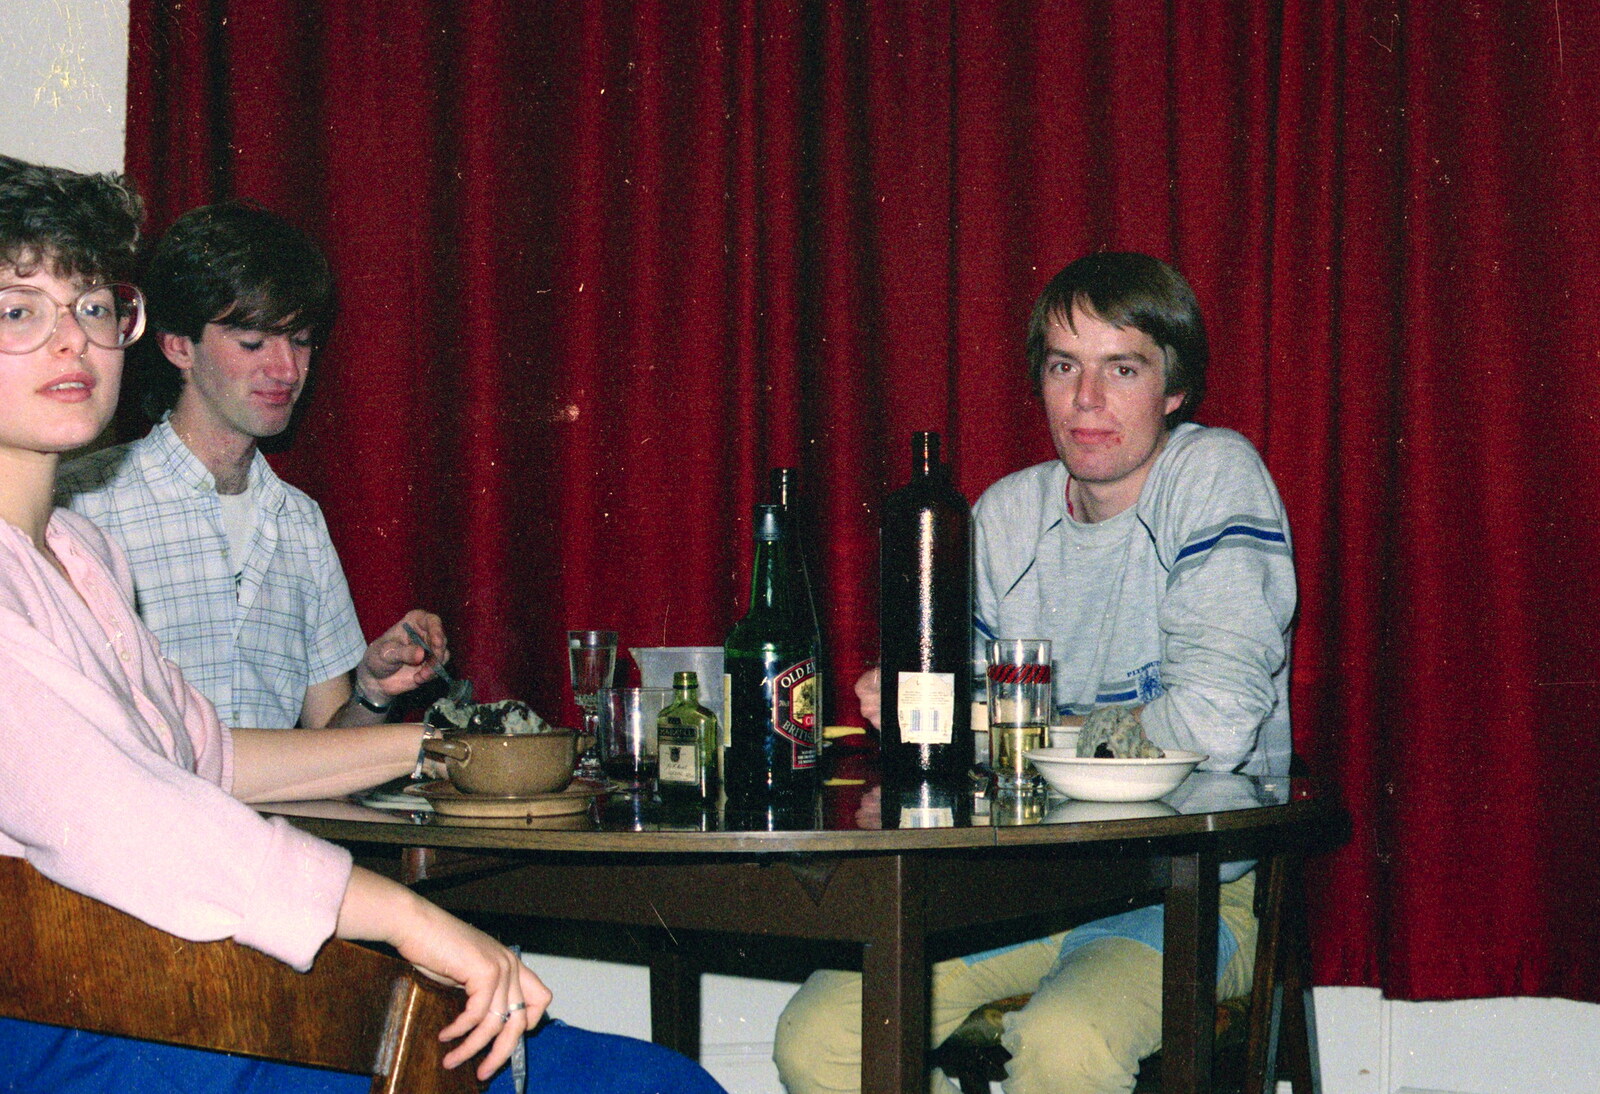 Barbara, James and Malcolm eat dinner from Uni: Beaumont Street Decorations and Water Fight, Plymouth - 14th December 1985